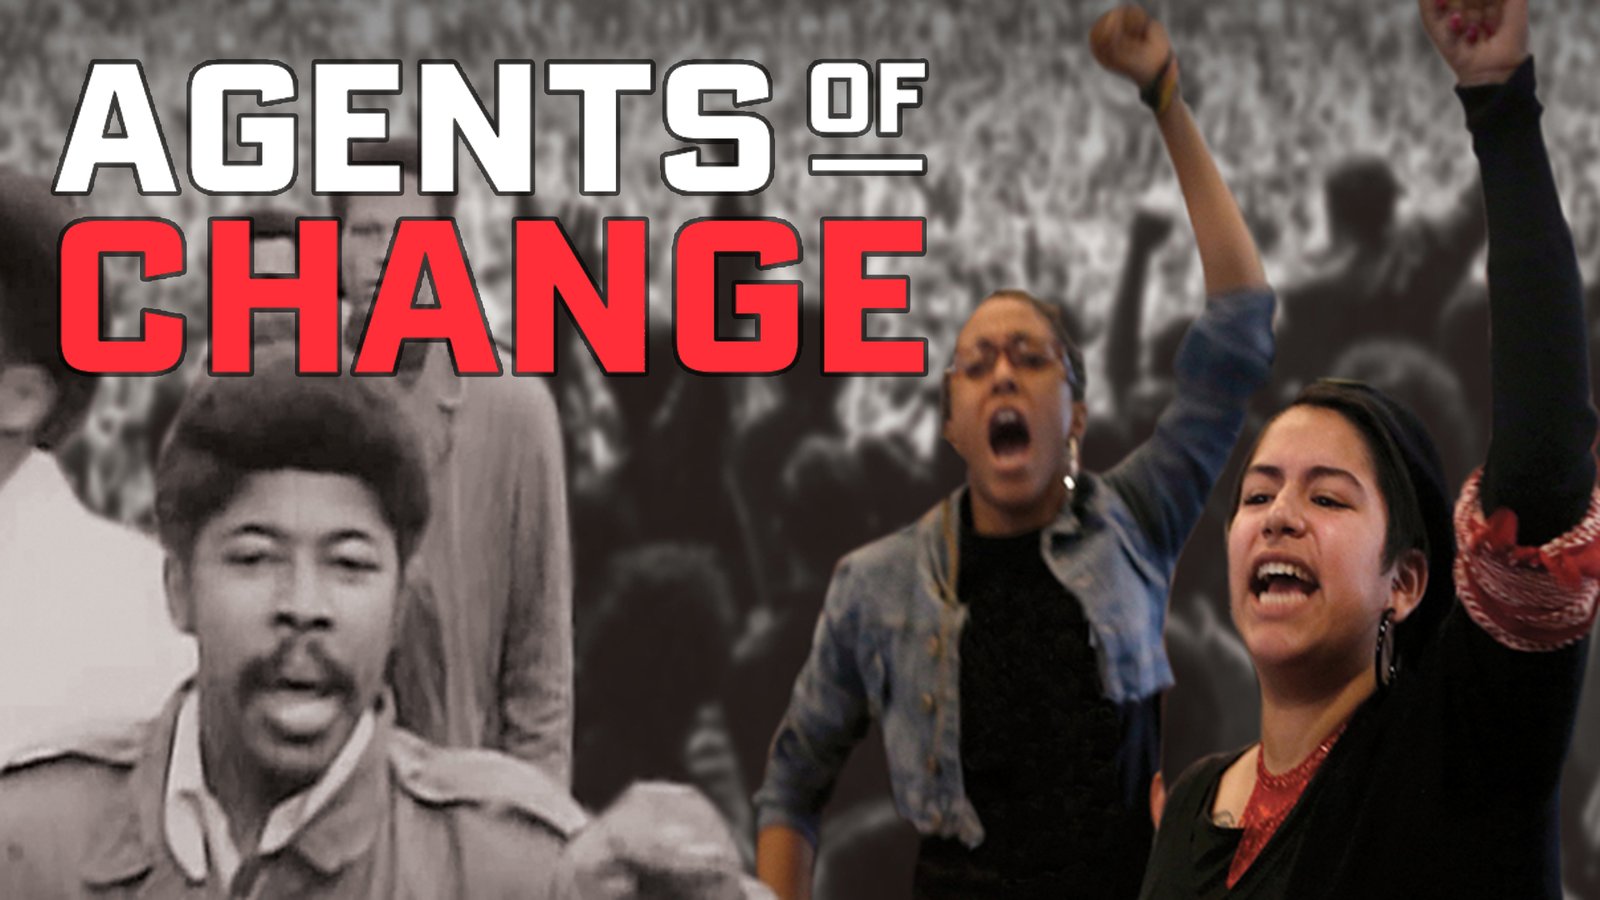 Agents of Change - The Longest Student Strike in U.S. History